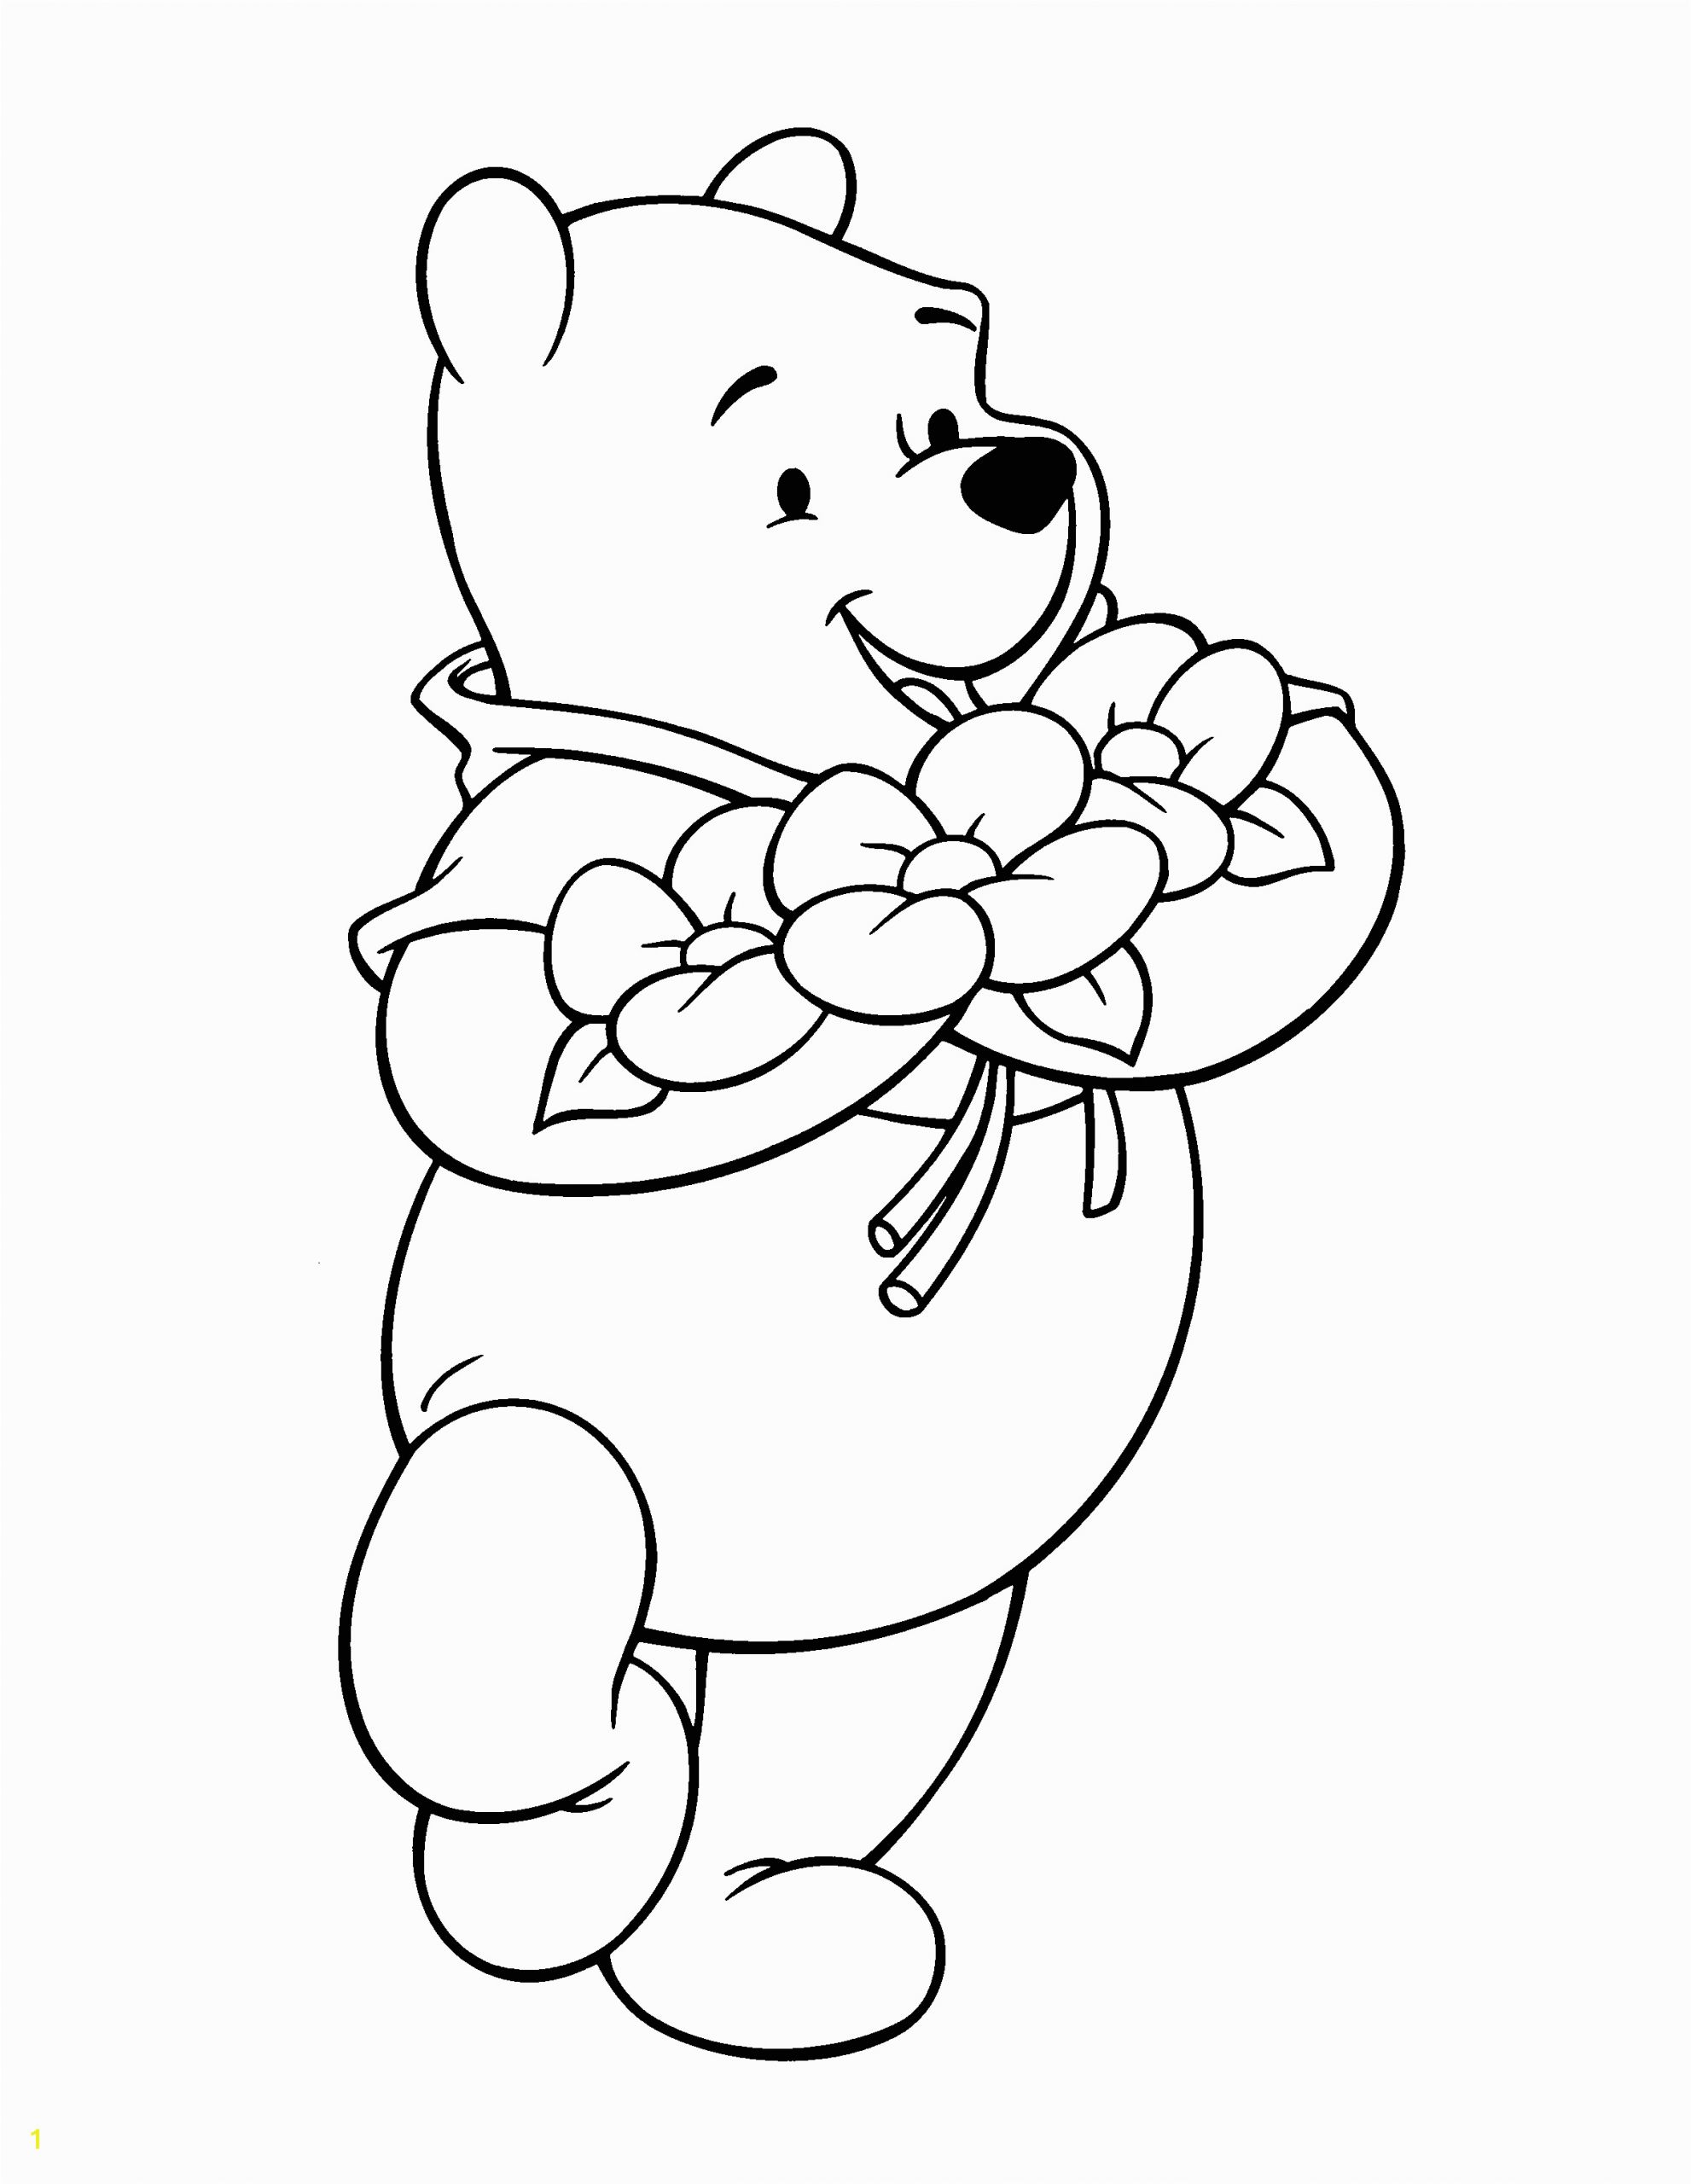 Baby Winnie the Pooh and Tigger Coloring Pages Baby Tigger and Pooh Drawings Winnie the Pooh Face